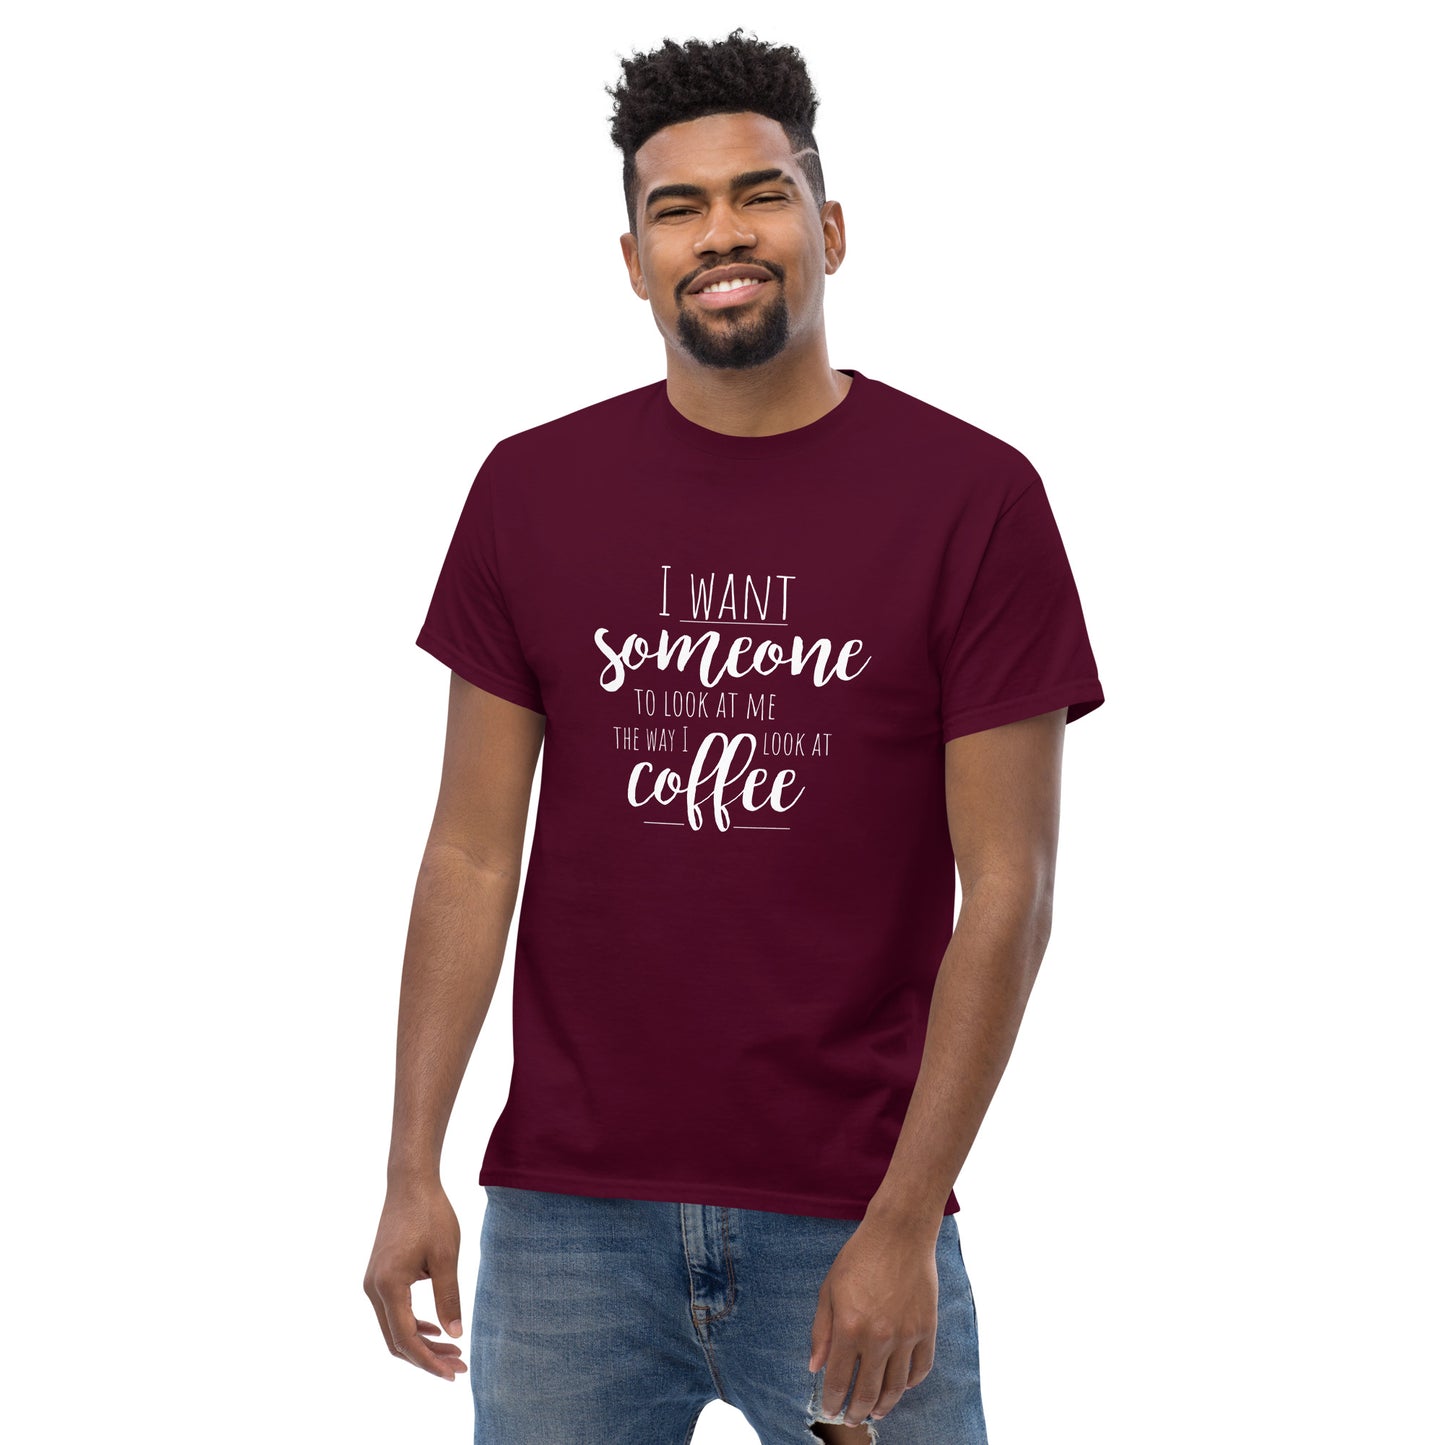 I Want Someone To Look At Me the Way I Look at Coffe | Knqv | Men's classic tee